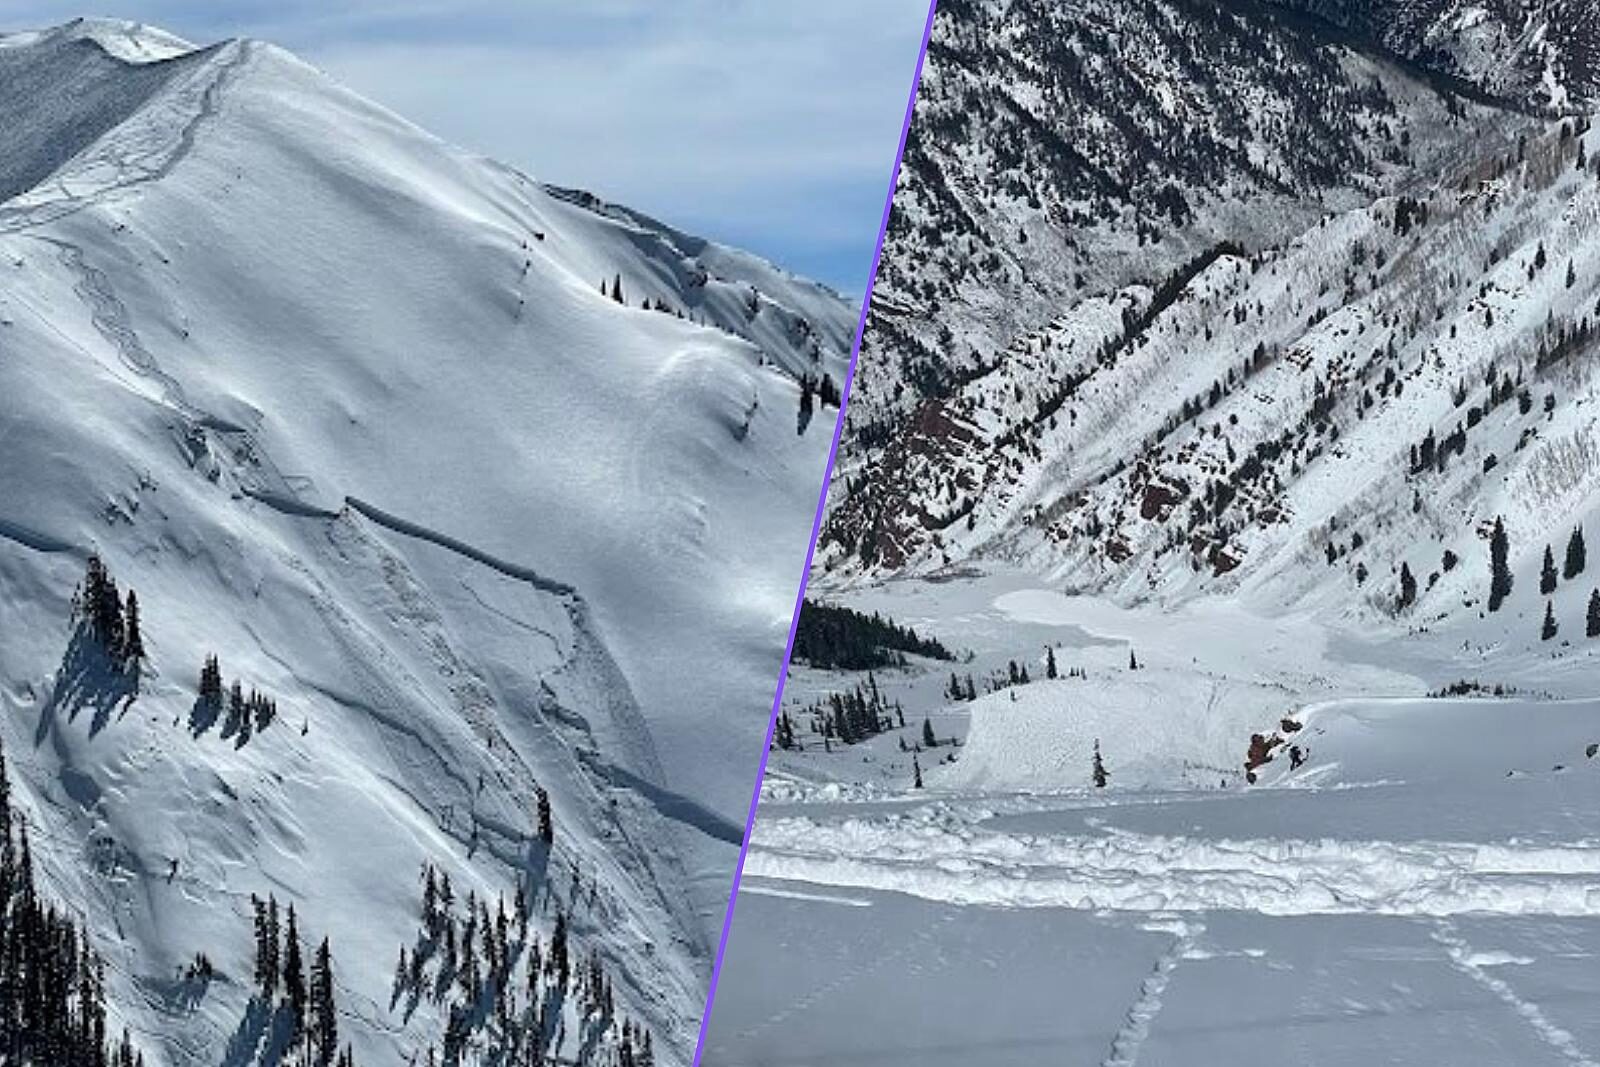 Two skiers died over the weekend in separate